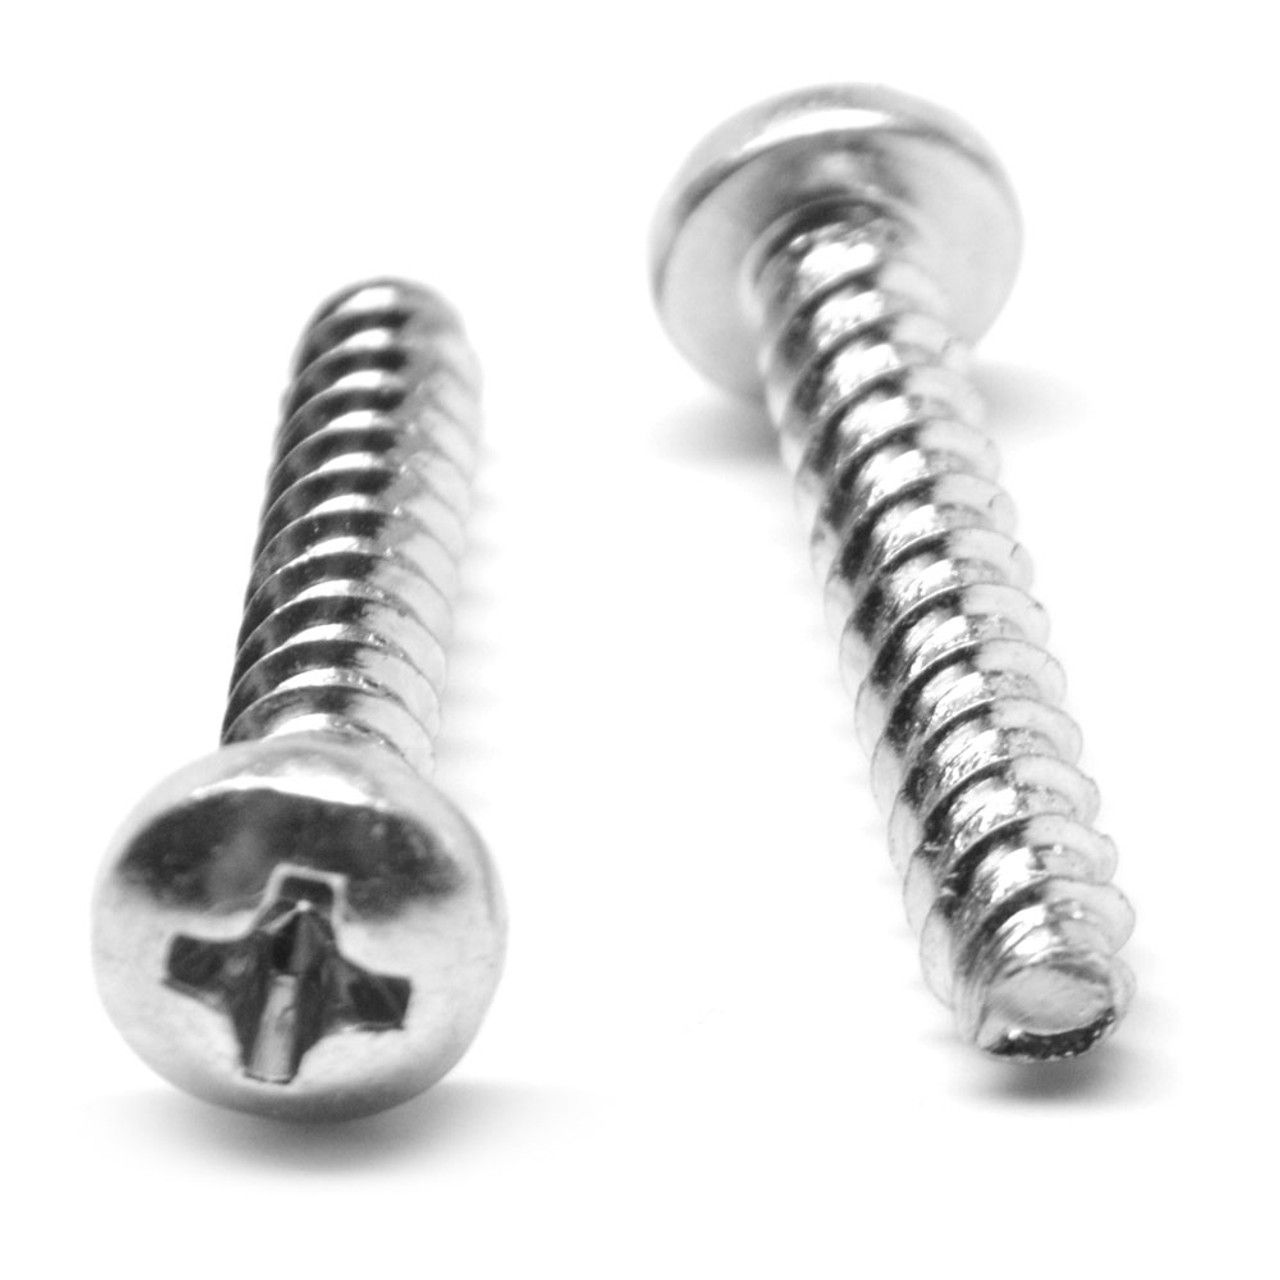 M2.2 x 0.98 x 12 MM EJOT PT-Alternative Phillips Pan Head Thread Forming Screw Stainless Steel 18-8